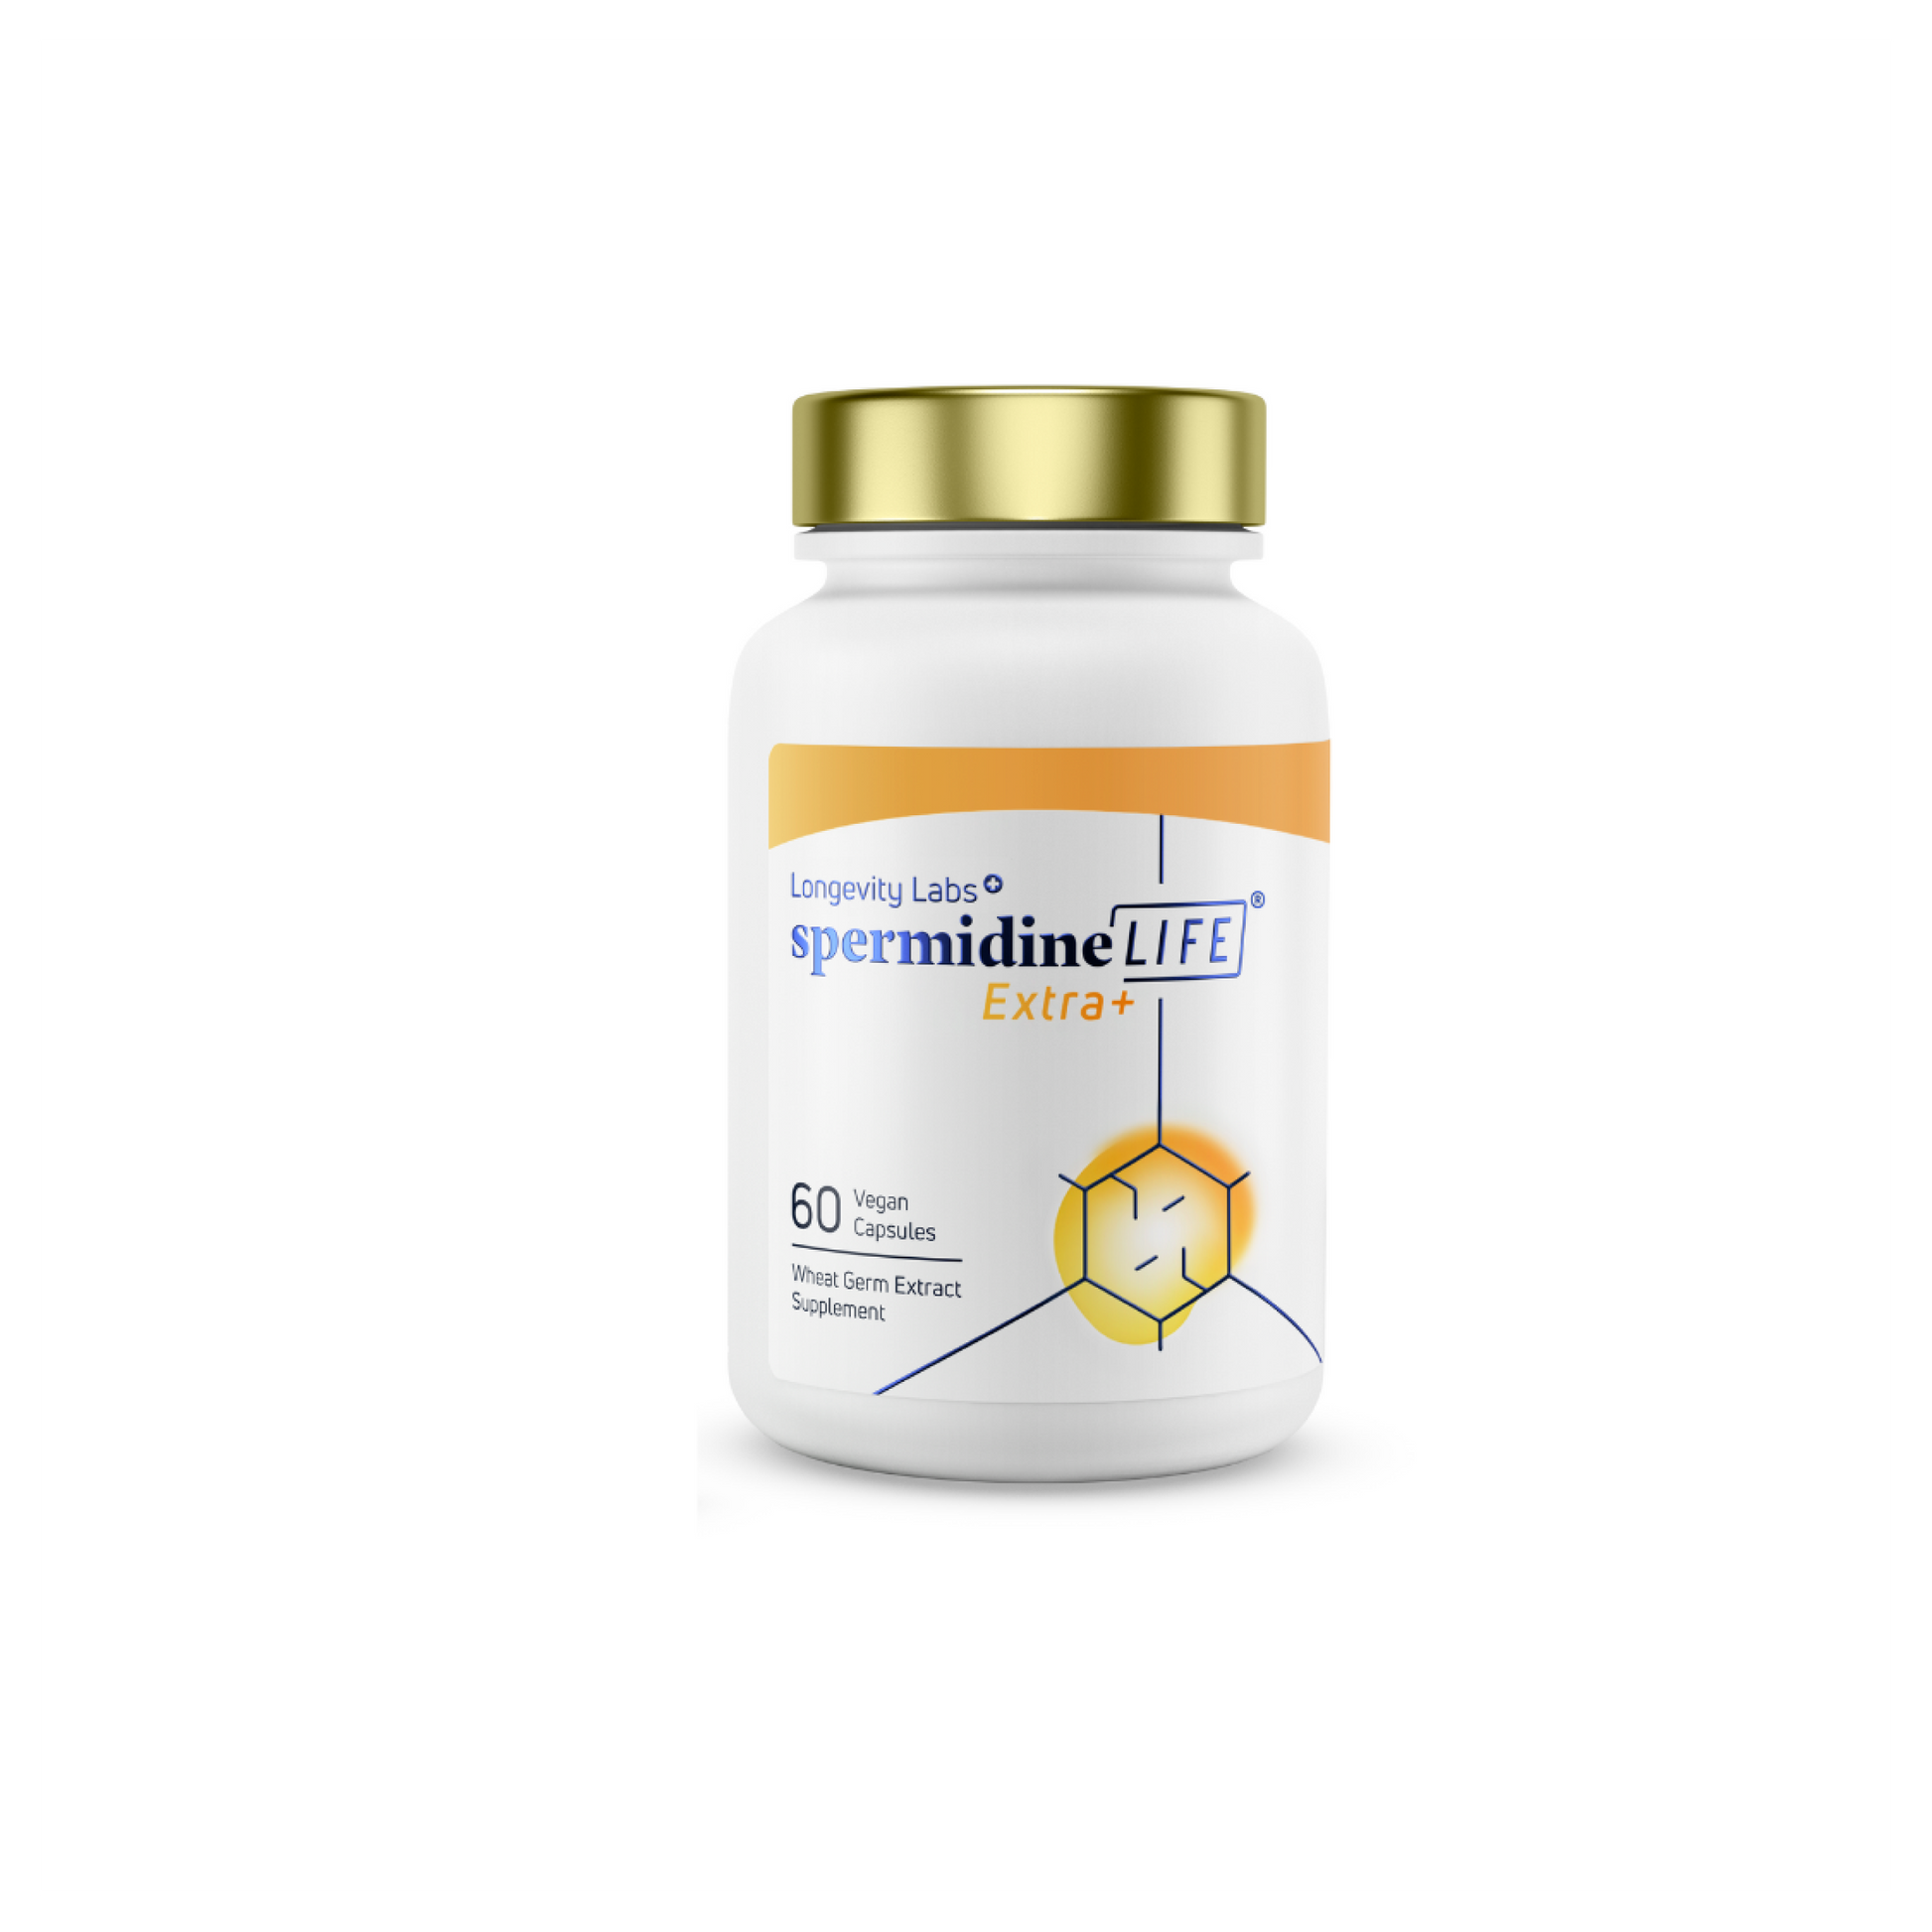 A bottle of spermidineLife® Extra+ 1300mg Dietary Supplement by Longevity Labs, Inc for cellular renewal on a white background.